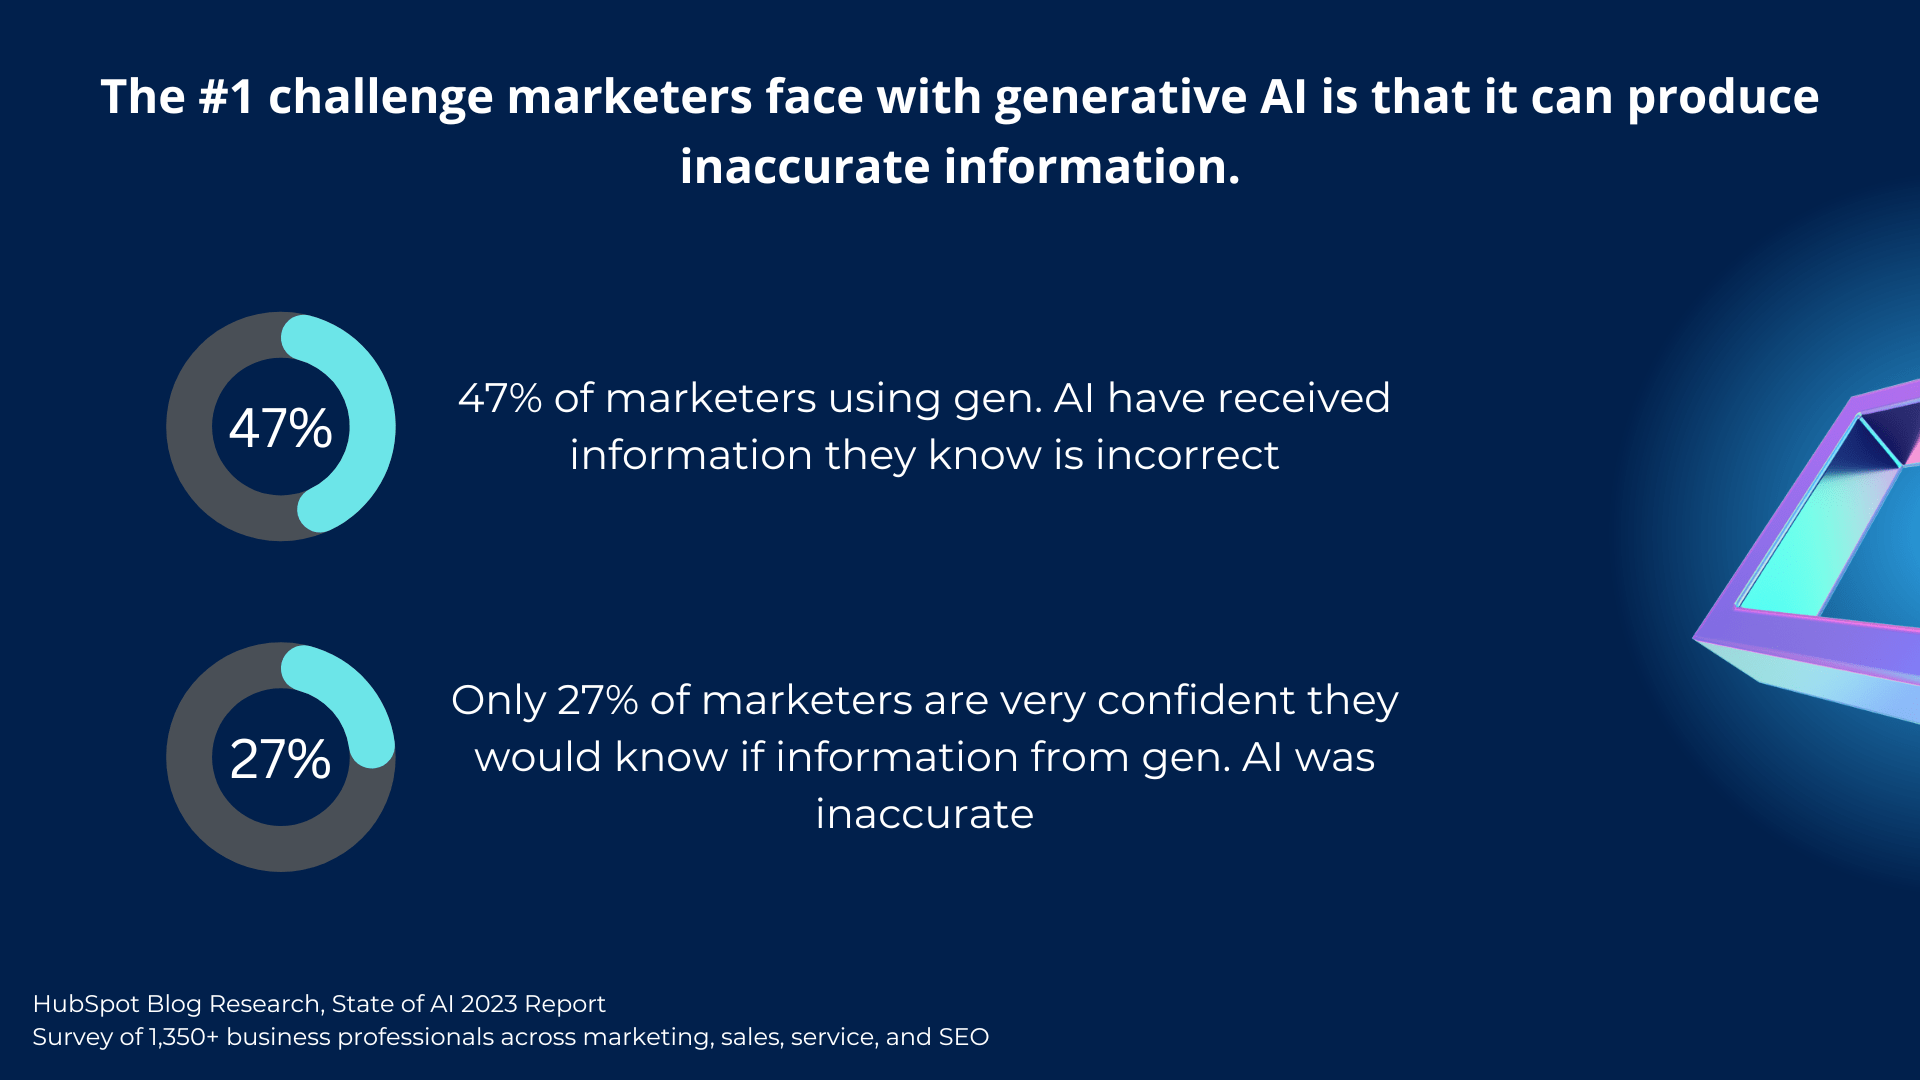 challenges%20marketers%20face%20with%20generative%20ai.png?width=1920&height=1080&name=challenges%20marketers%20face%20with%20generative%20ai - The HubSpot Blog’s State of AI Report [Key Findings from 1300+ Business Professionals]